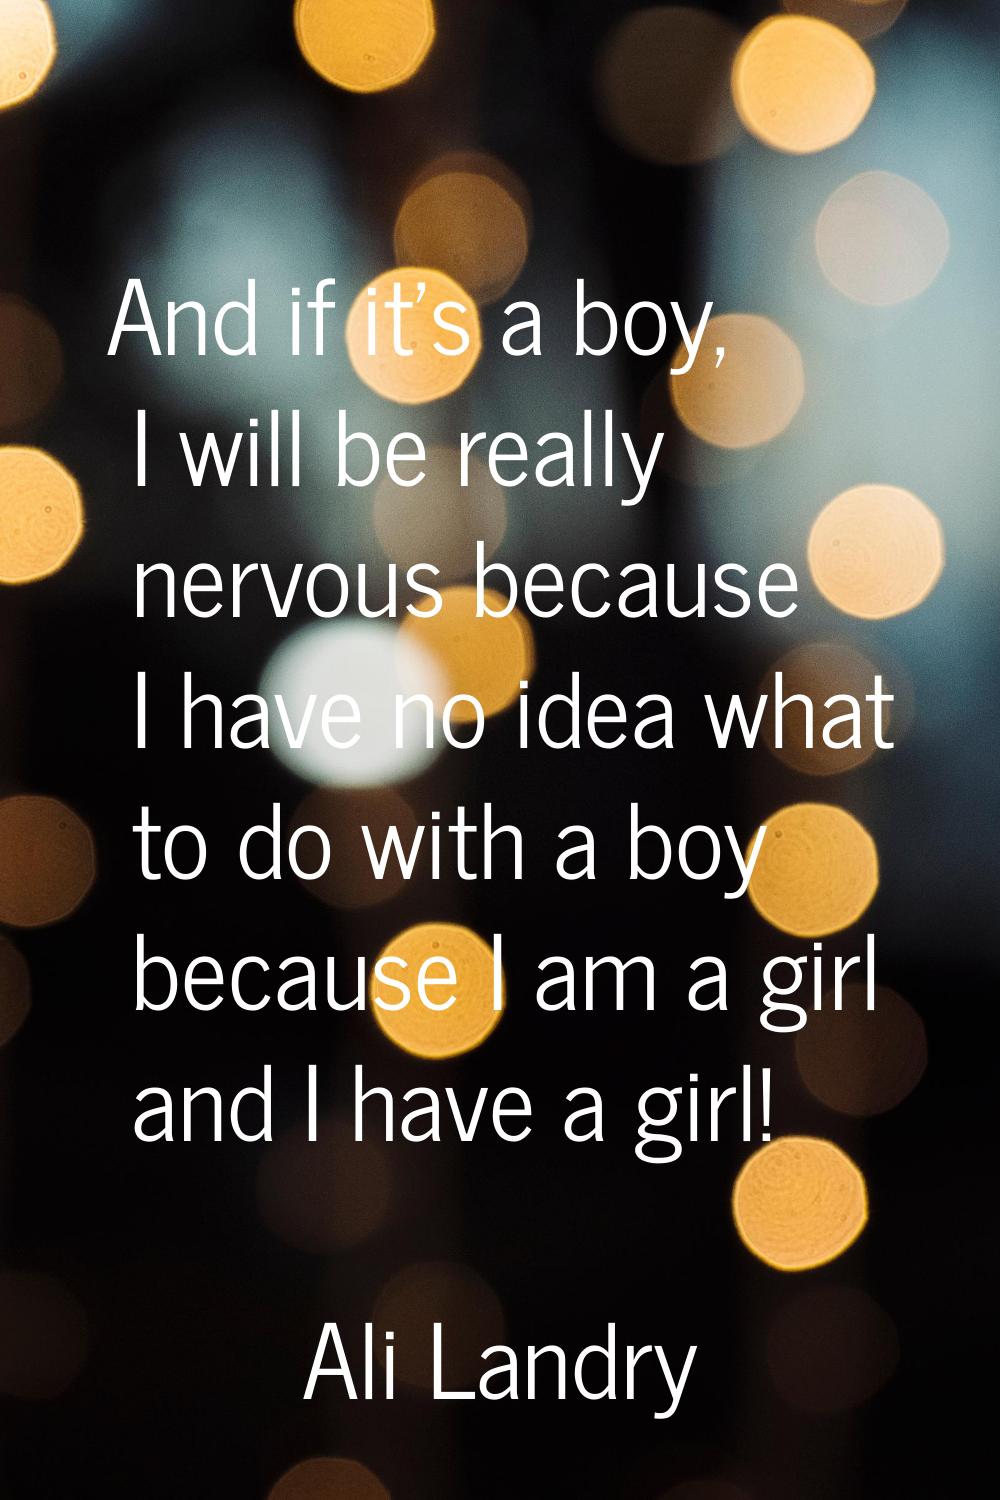 And if it's a boy, I will be really nervous because I have no idea what to do with a boy because I 